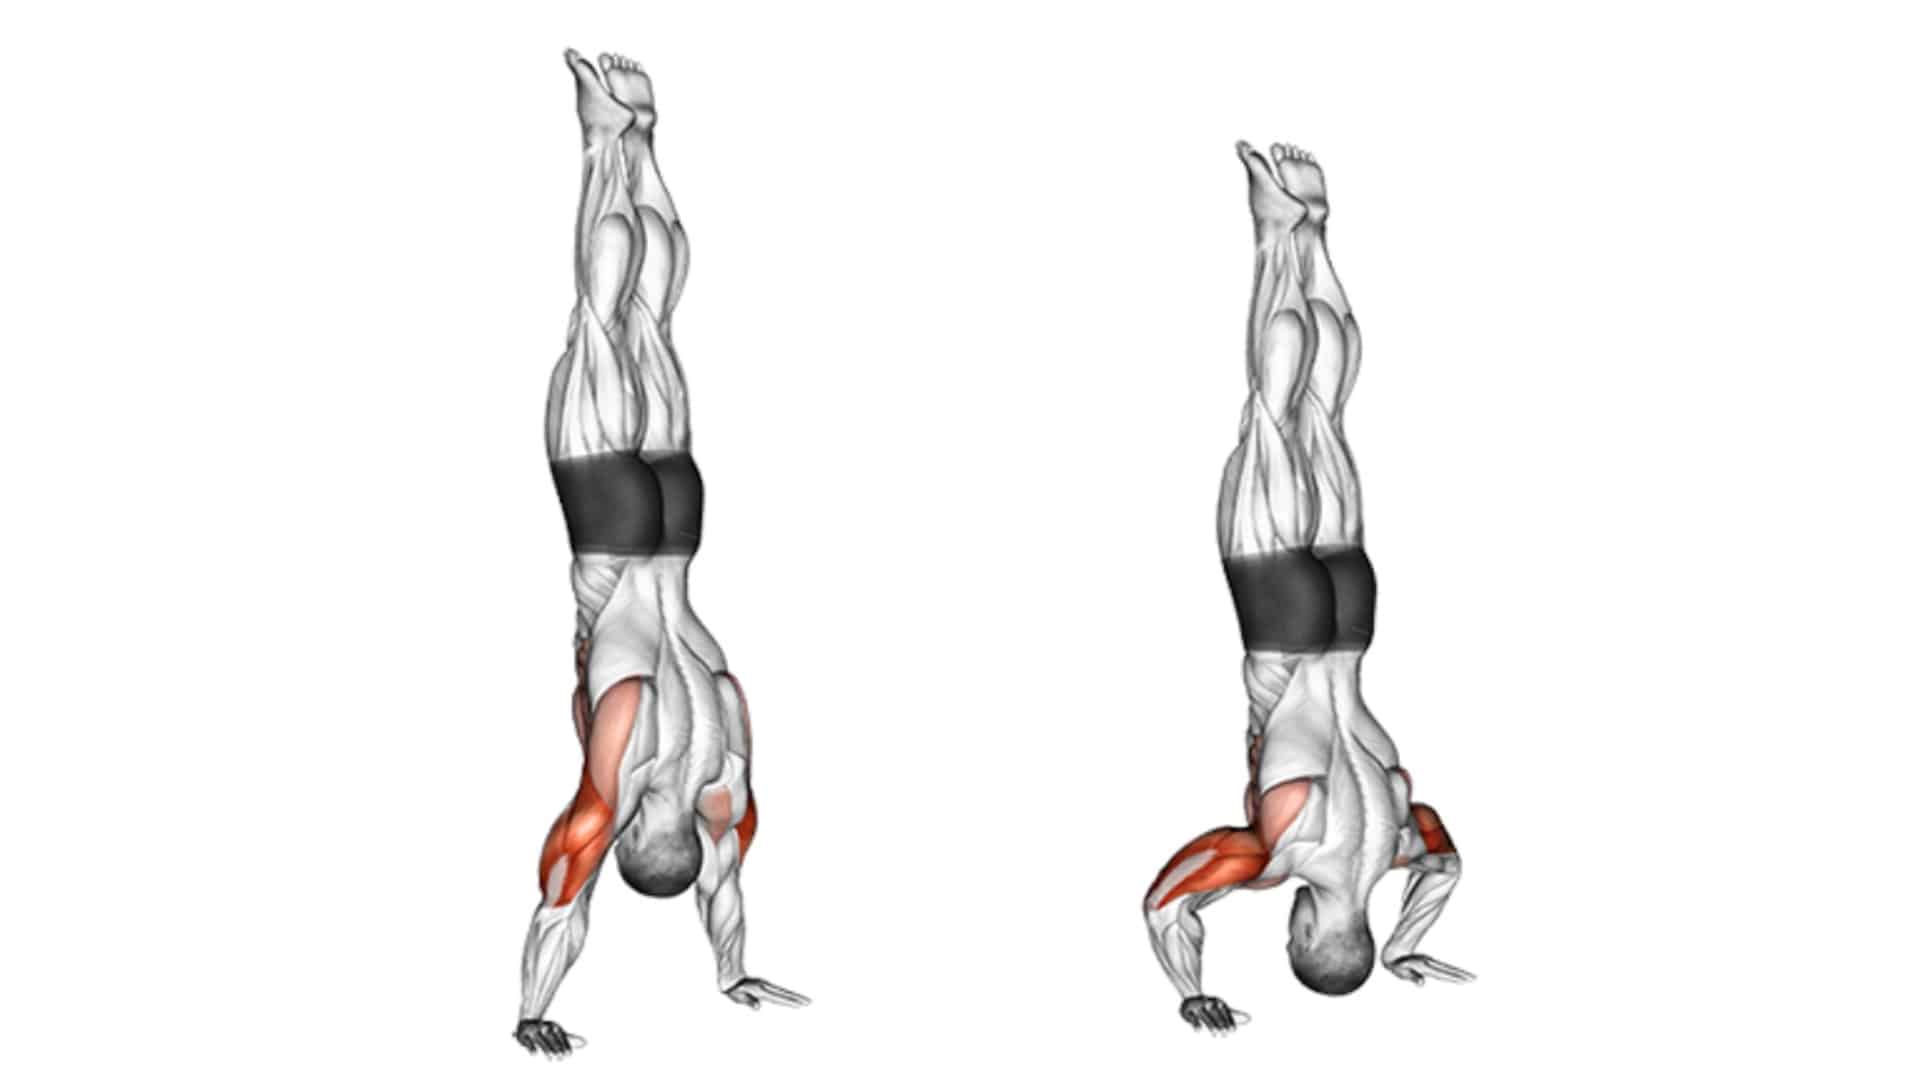 Handstand Push Up